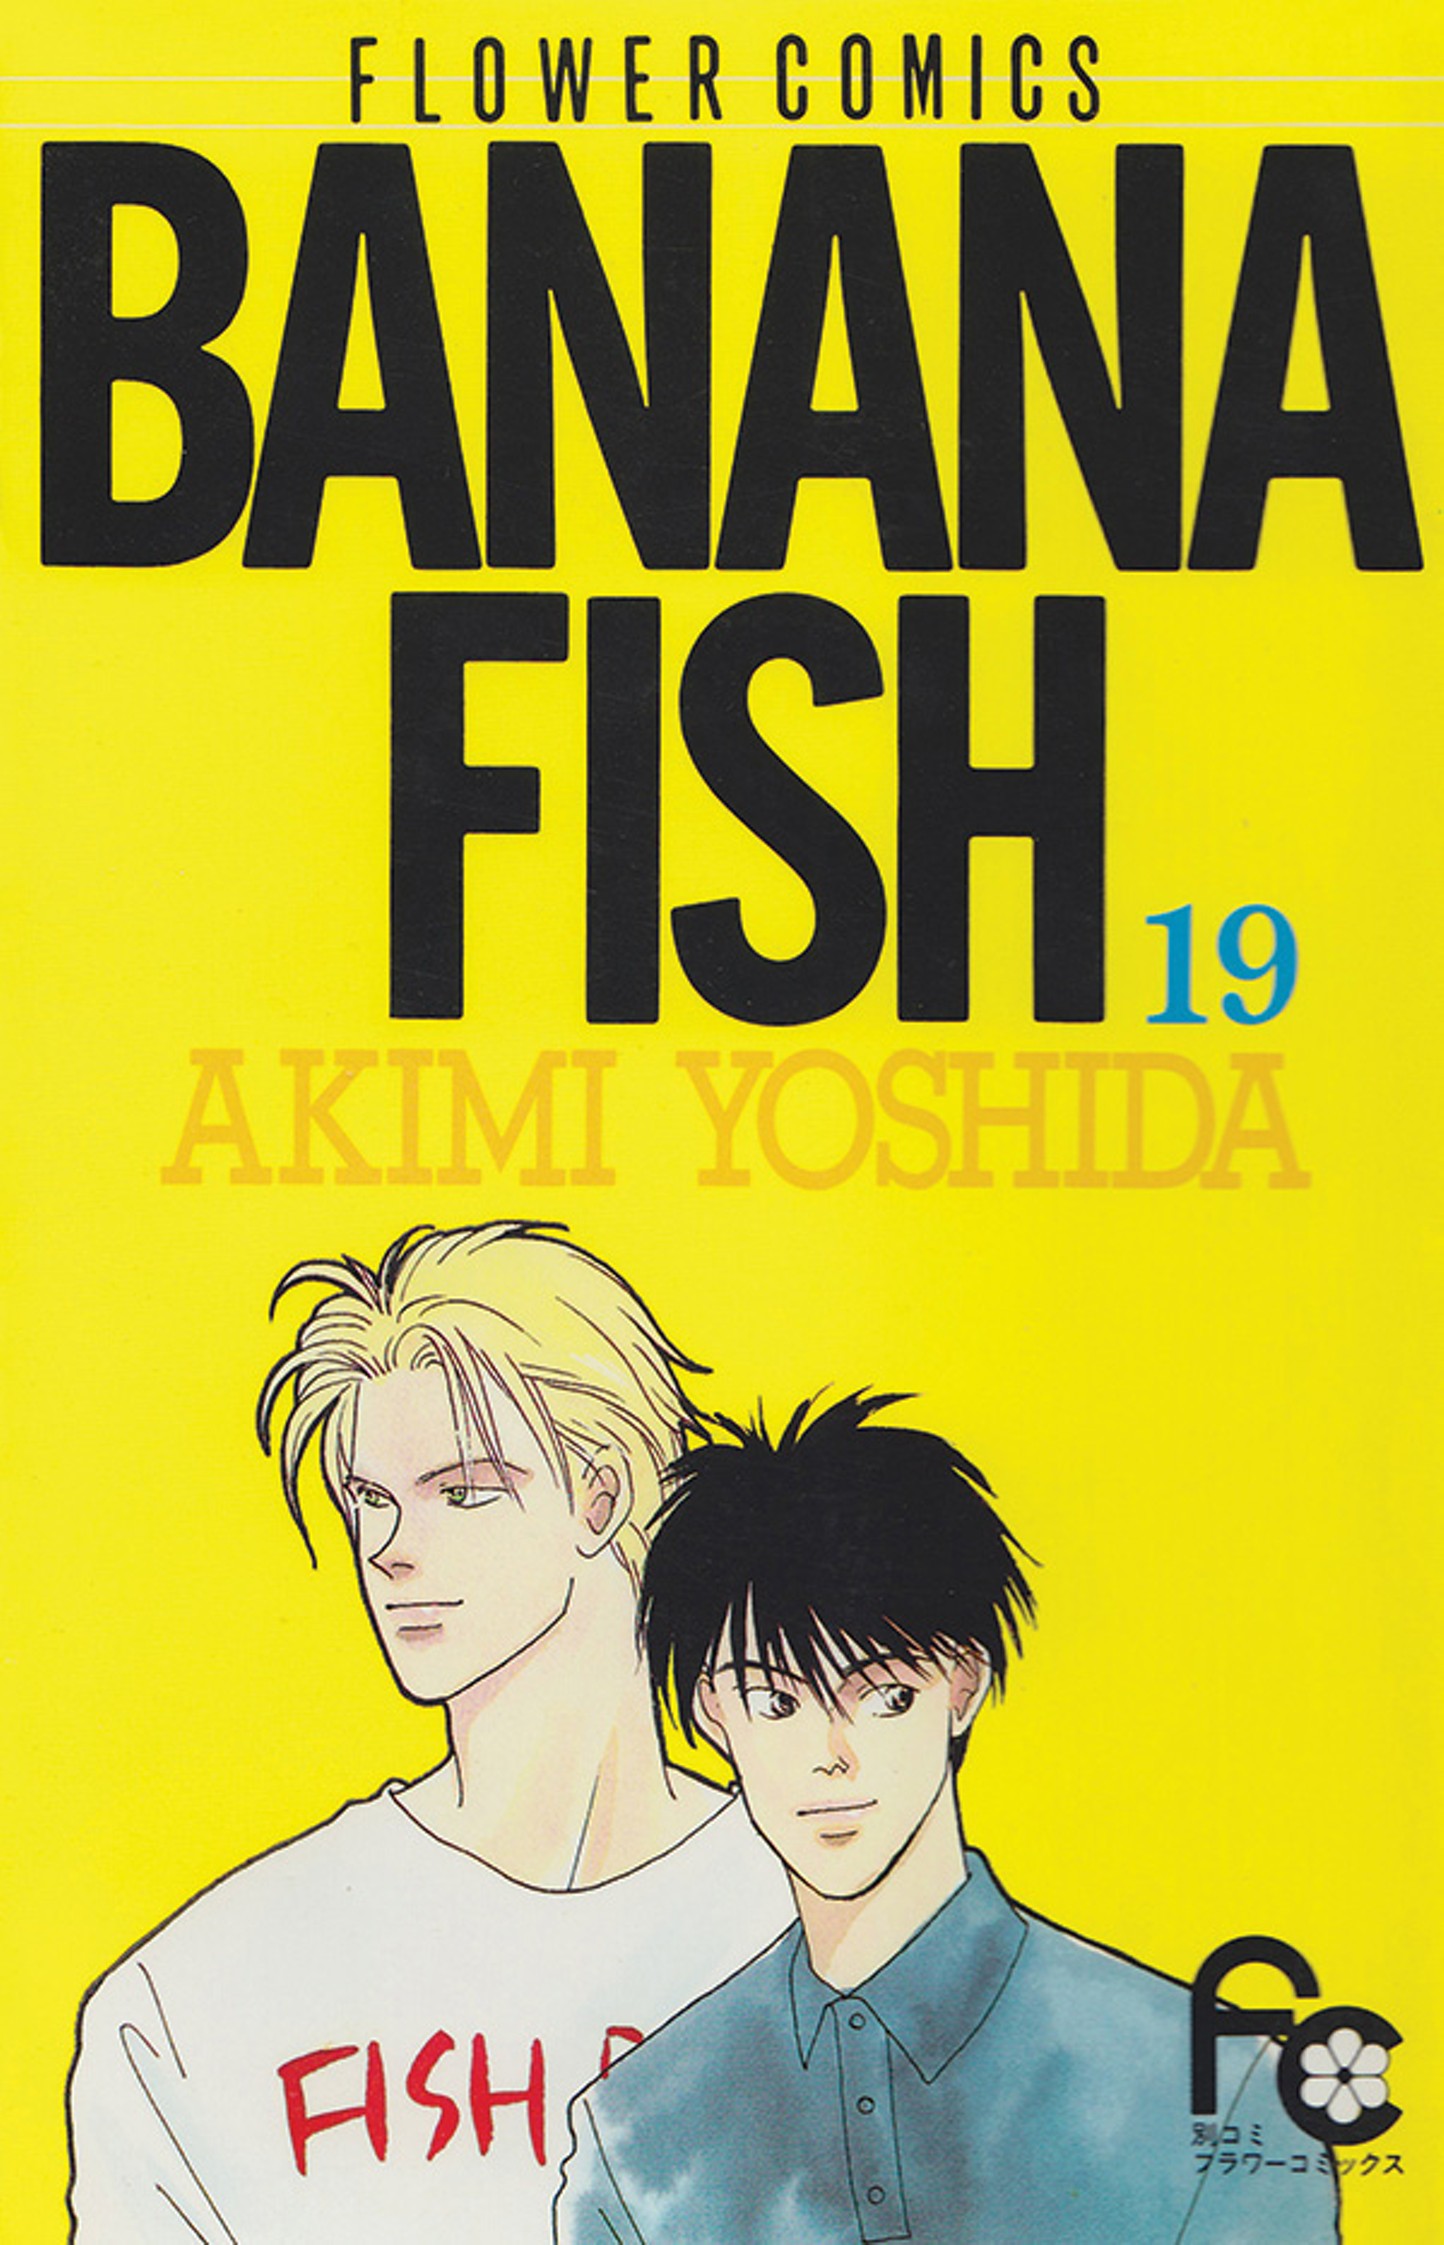 A Perfect Day for BANANAFISH, Anime-Book Review